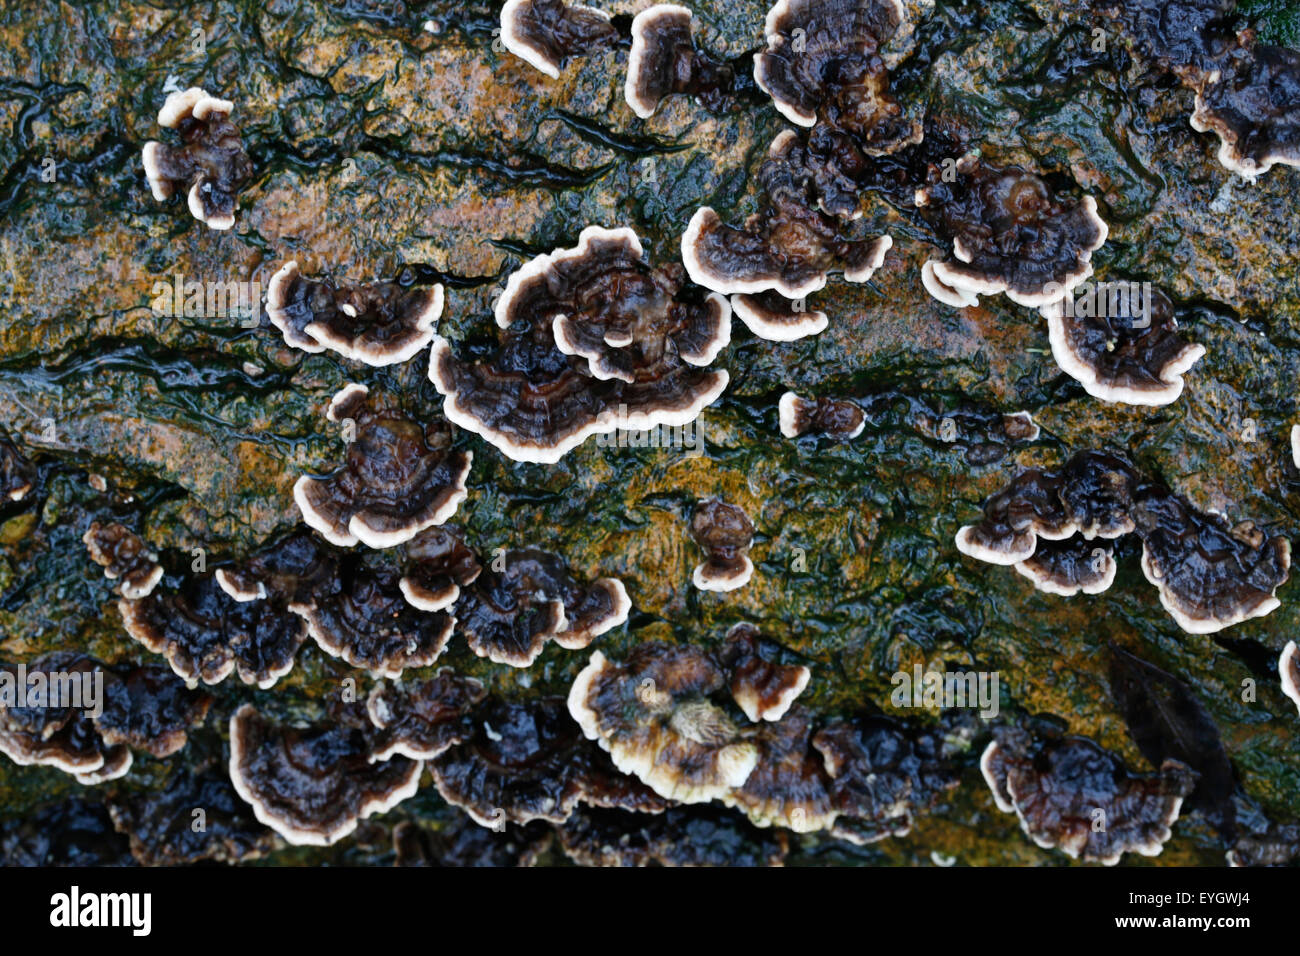 Brown and white Turkey tail fungus or mushrooms, Trametes versicolor, growing on a wet branch in a damp English woodland Stock Photo